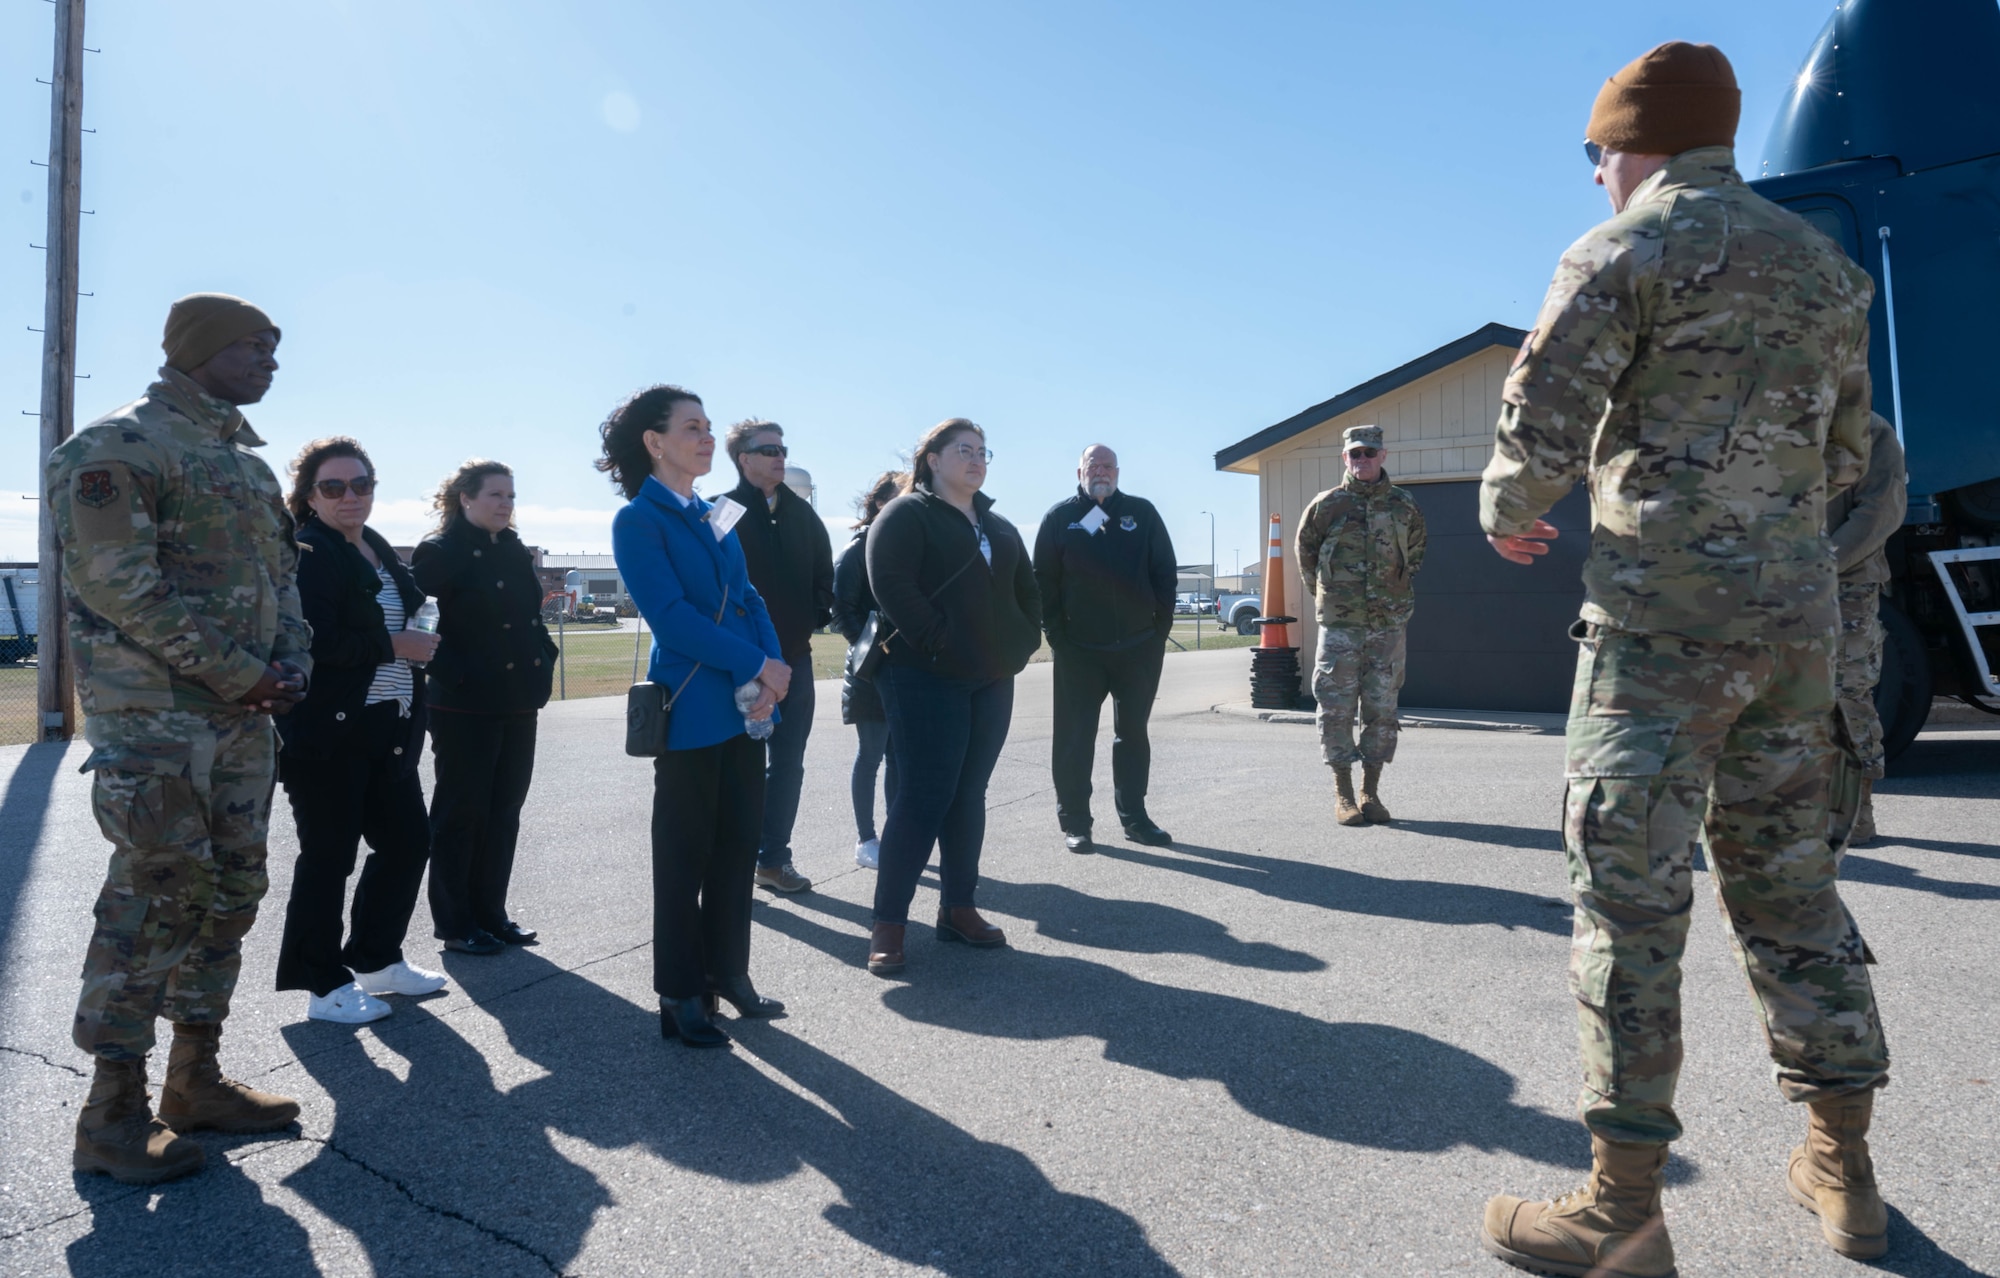 A group of civic leaders from North Dakota are given a tour of Training Launch Facility (LF) Uniform-01 at Minot Air Force Base, North Dakota, April 22, 2024. LF U-01 is used for training by maintainers, defenders and the tactical response force. (U.S. Air Force photo by Airman 1st Class Luis Gomez)